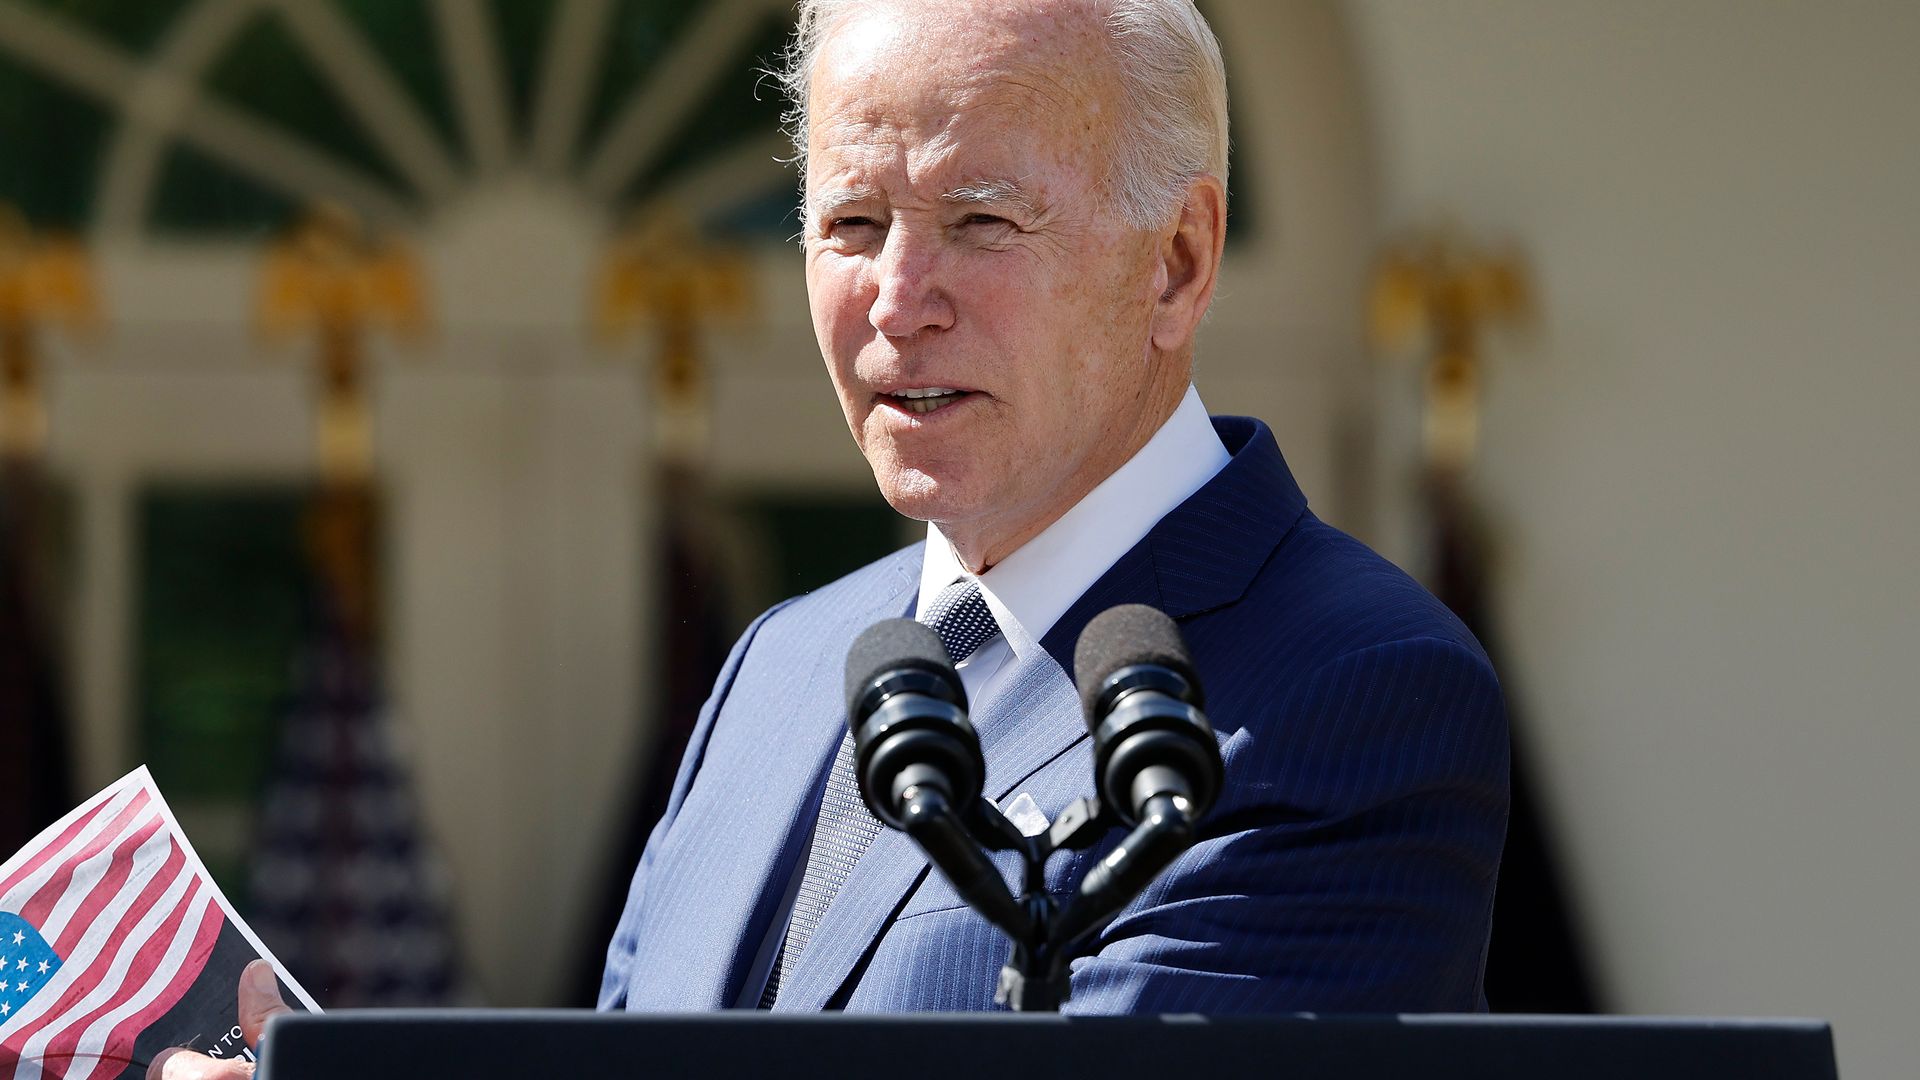 Biden’s response to Houthi attacks has been weak, hypocritical, and an example of everything wrong with his foreign policy.